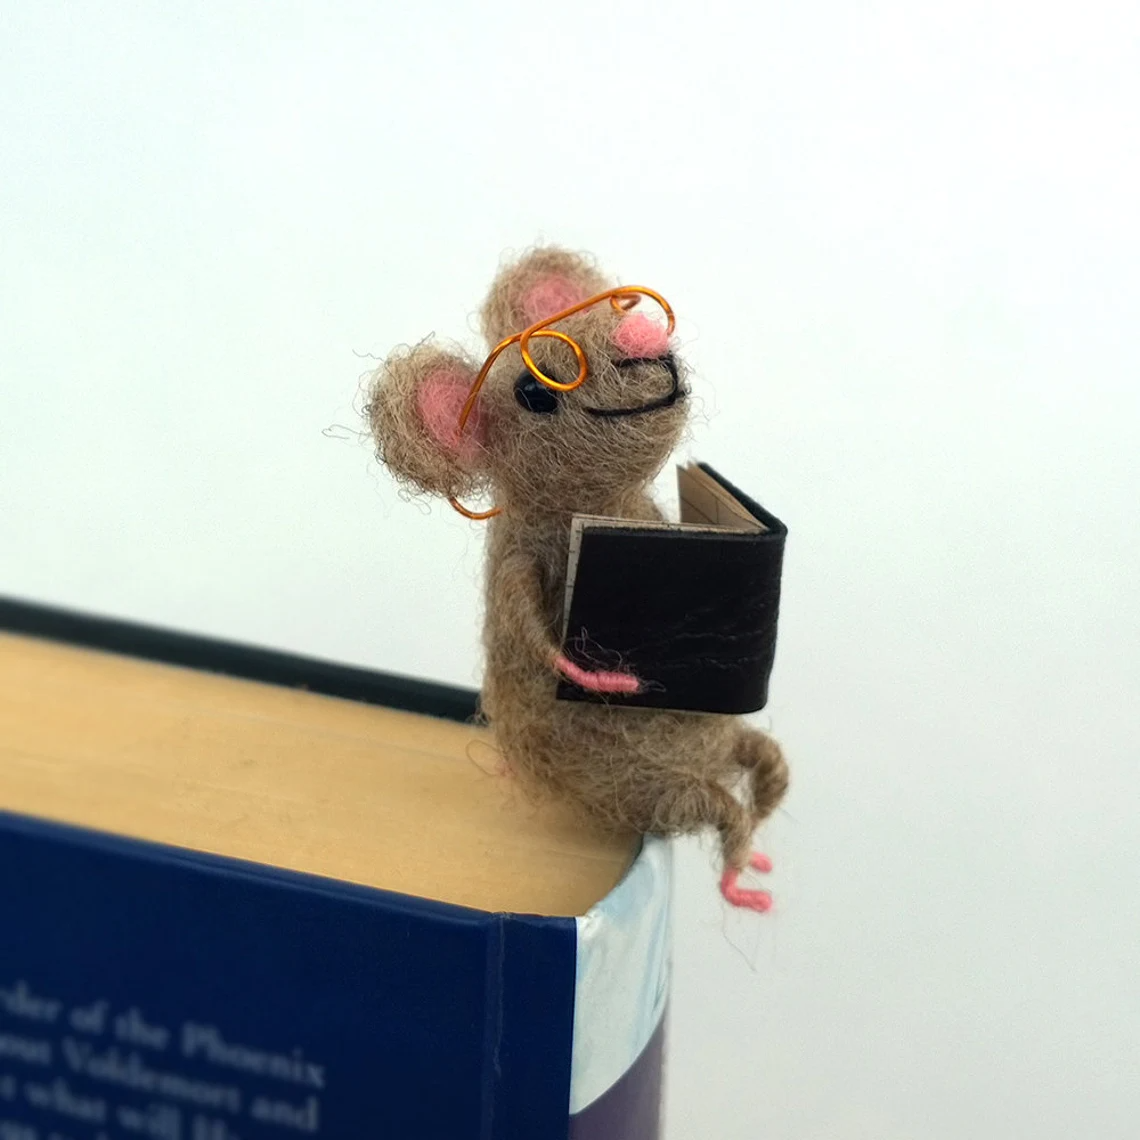 felt mouse wearing wire glasses sitting on book and holding tiny book